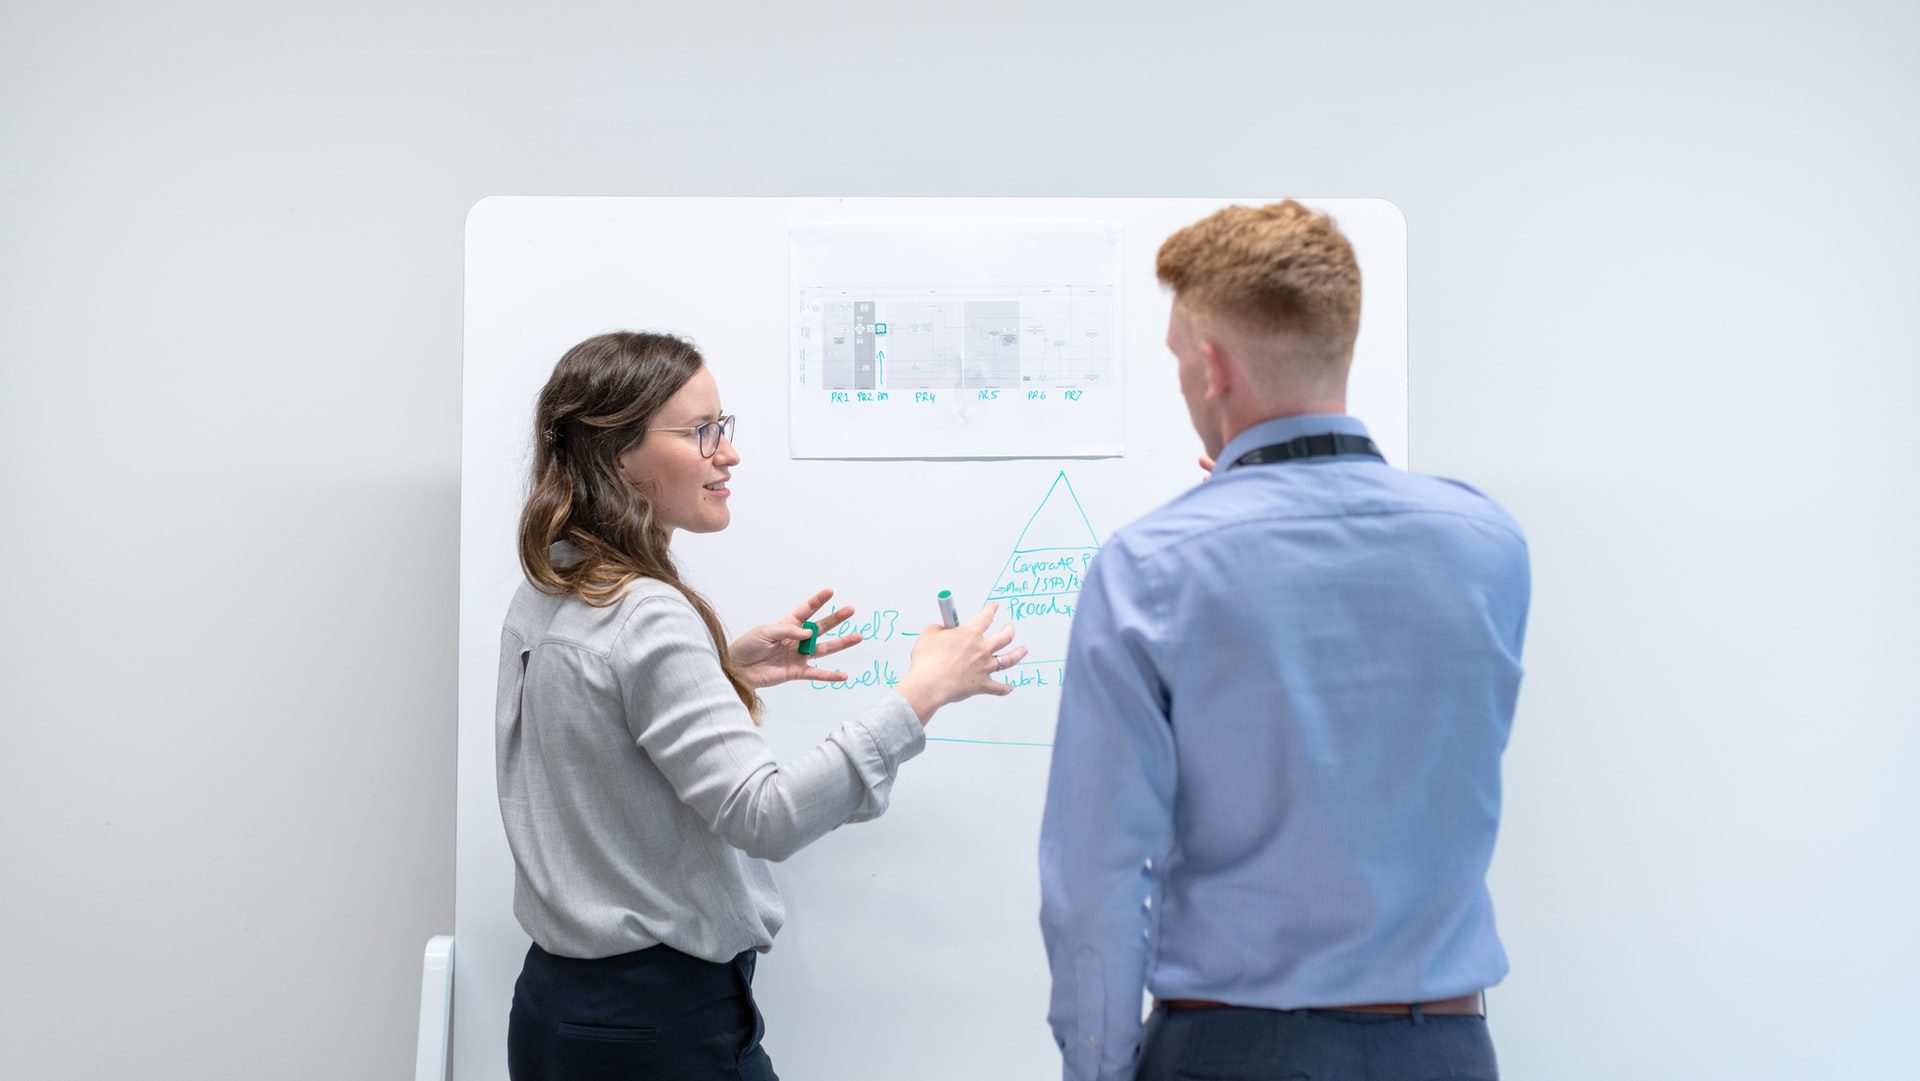 Man and a woman having a discussion in front of a white board